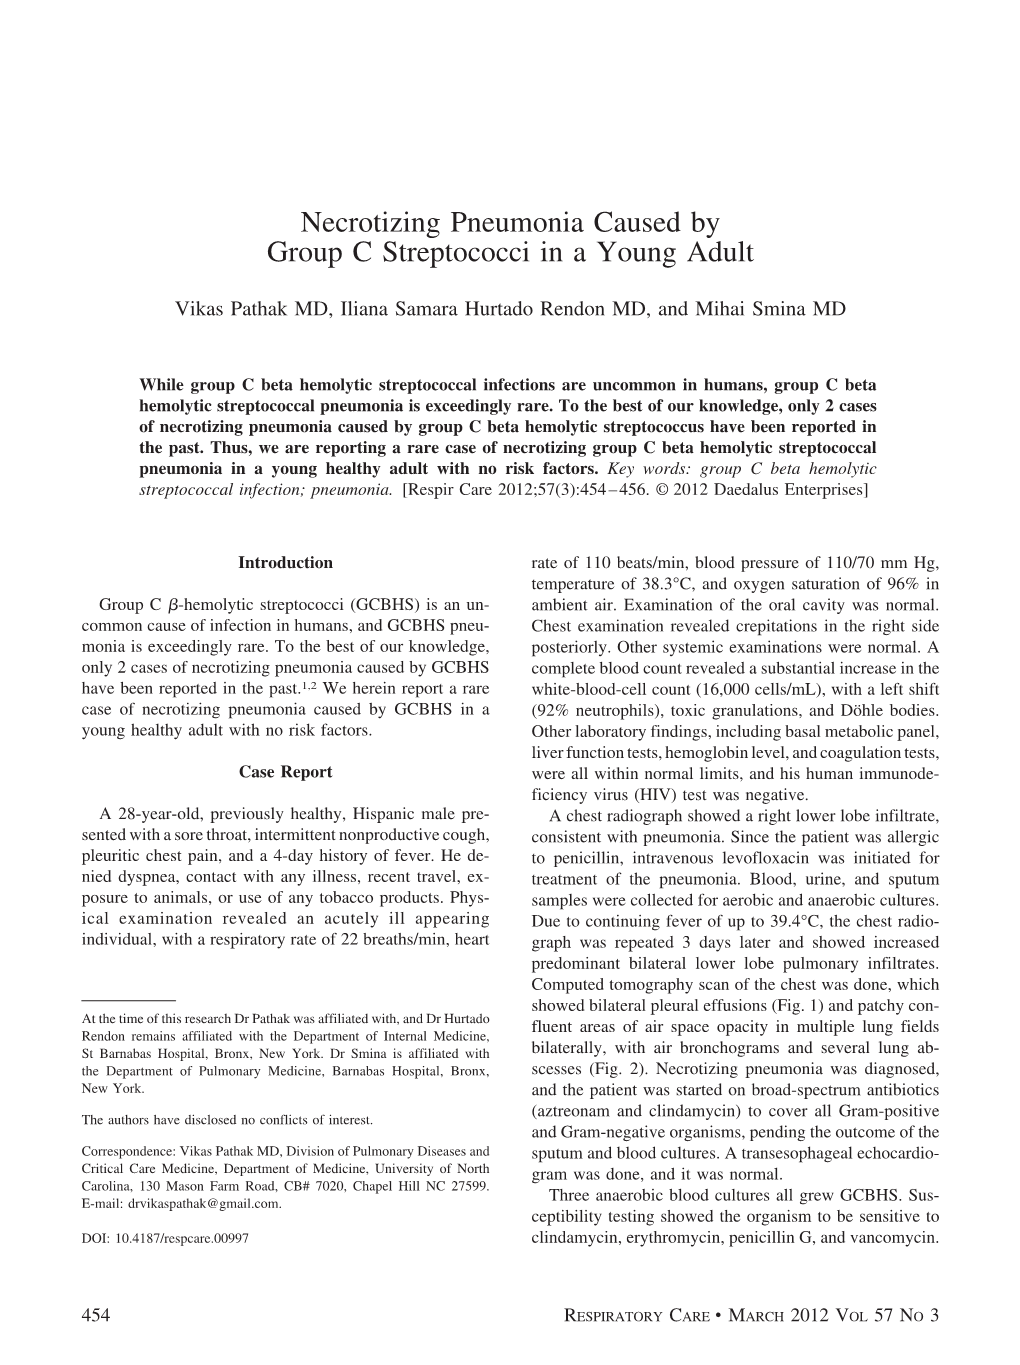 Necrotizing Pneumonia Caused by Group C Streptococci in a Young Adult